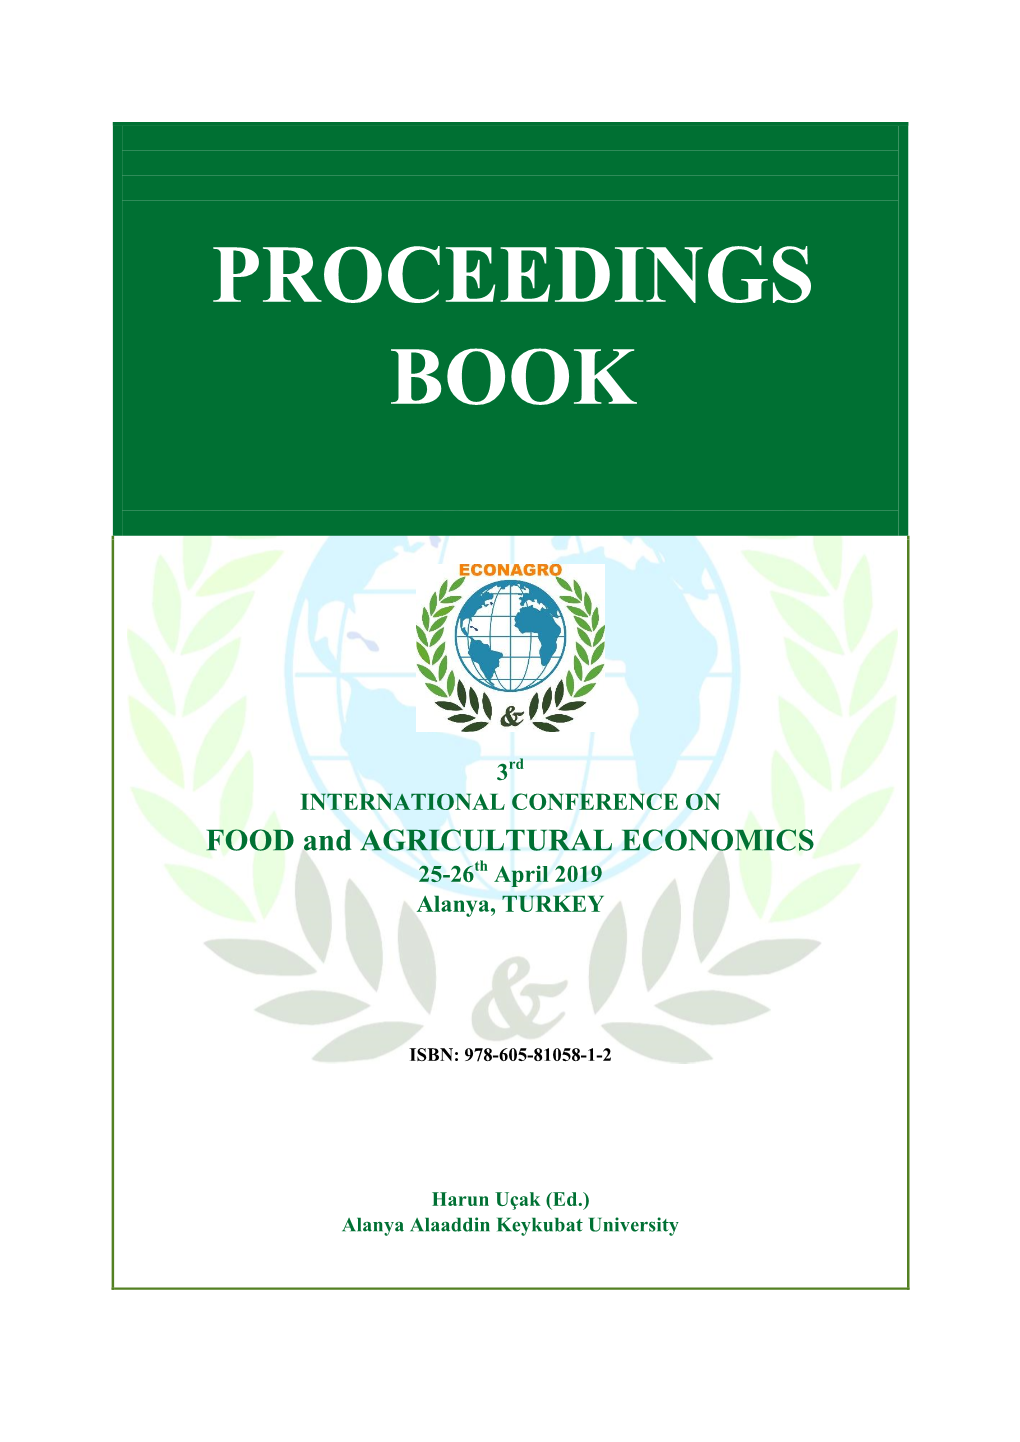 PROCEEDINGS BOOK (Full Texts-Abstracts-Posters)